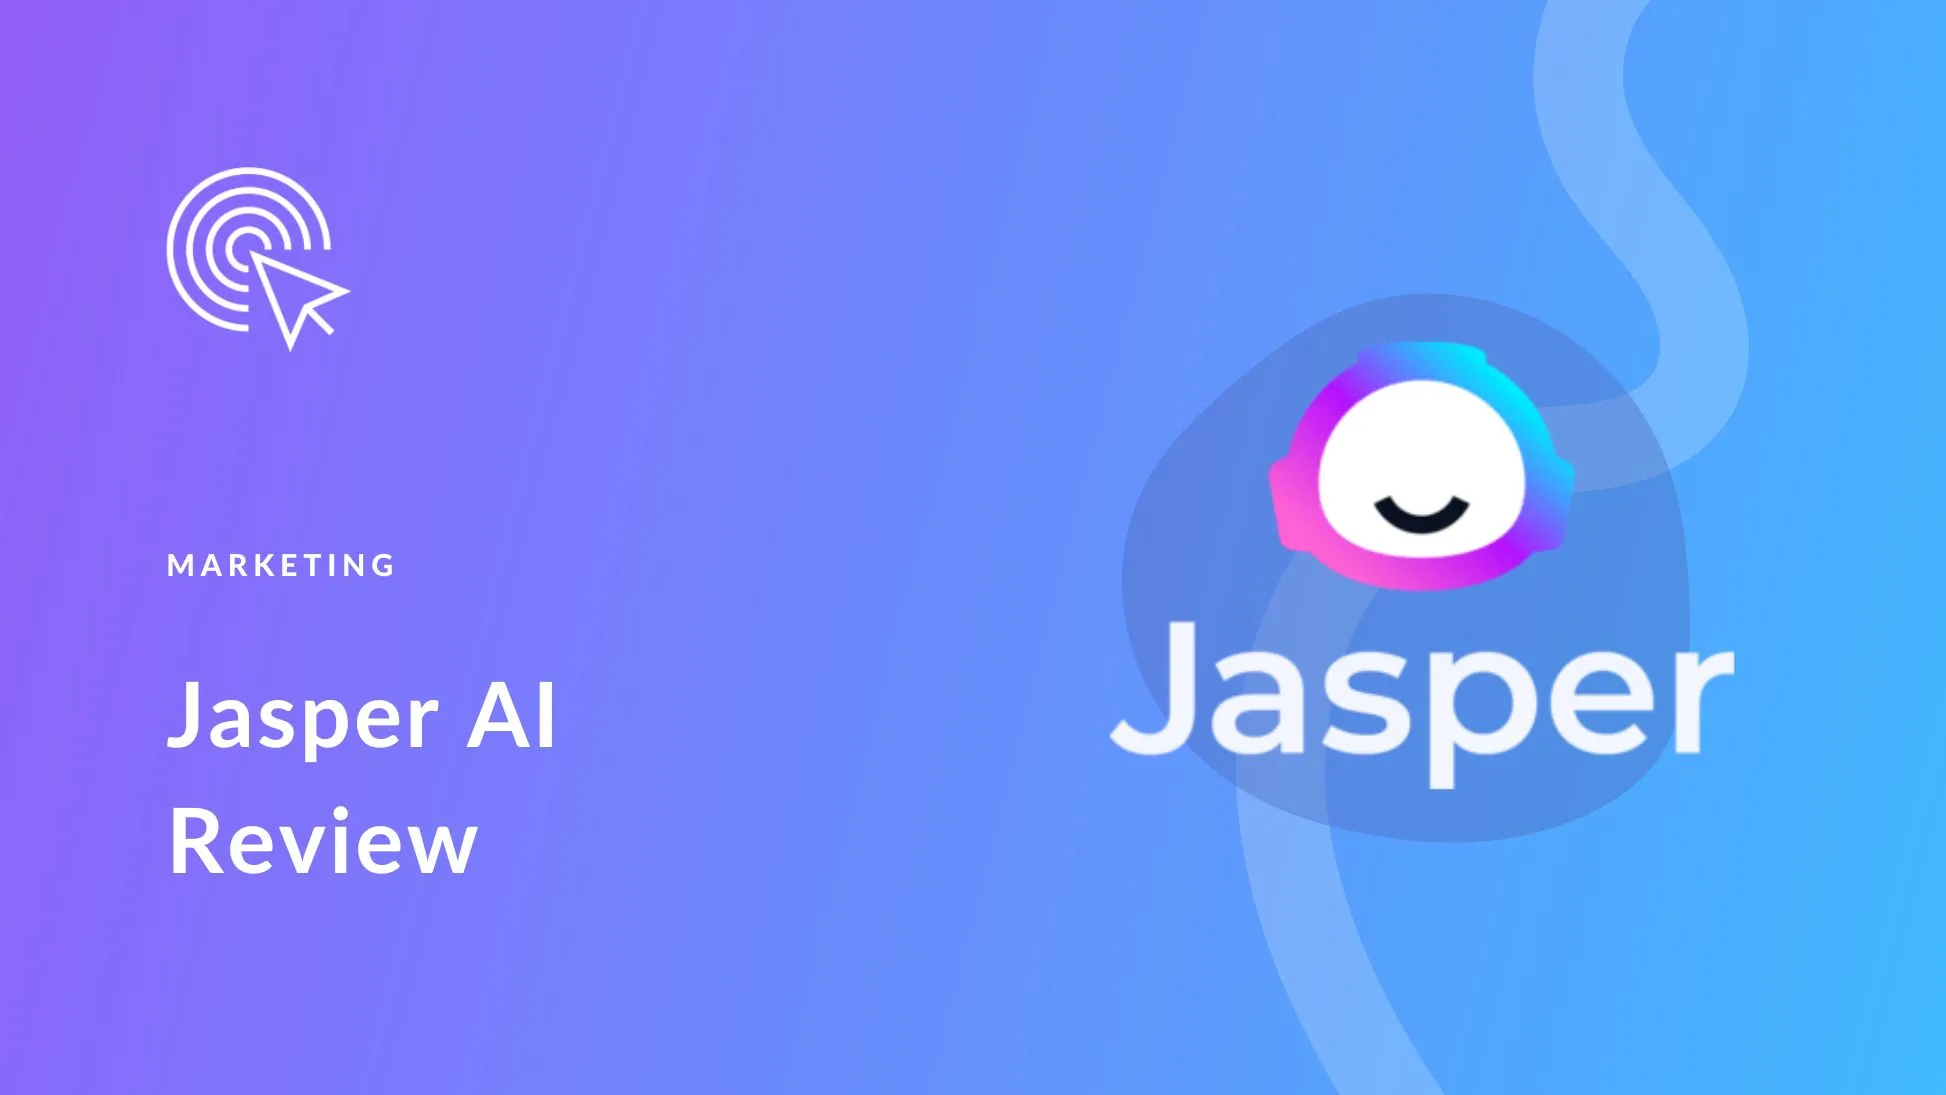 Jasper AI Review and Guide